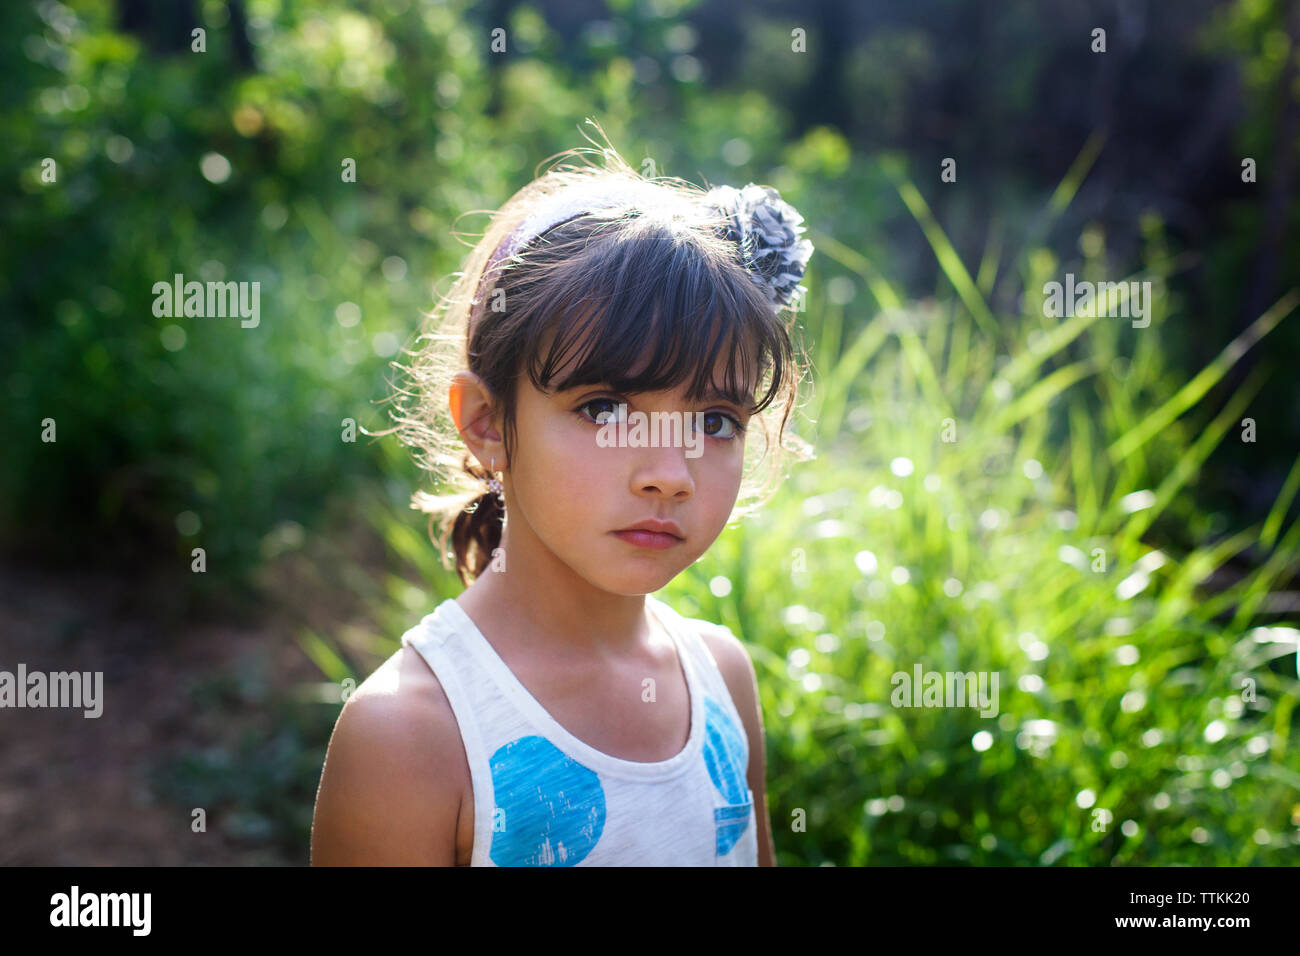 Close-up portrait of girl standing against plants Stock Photo